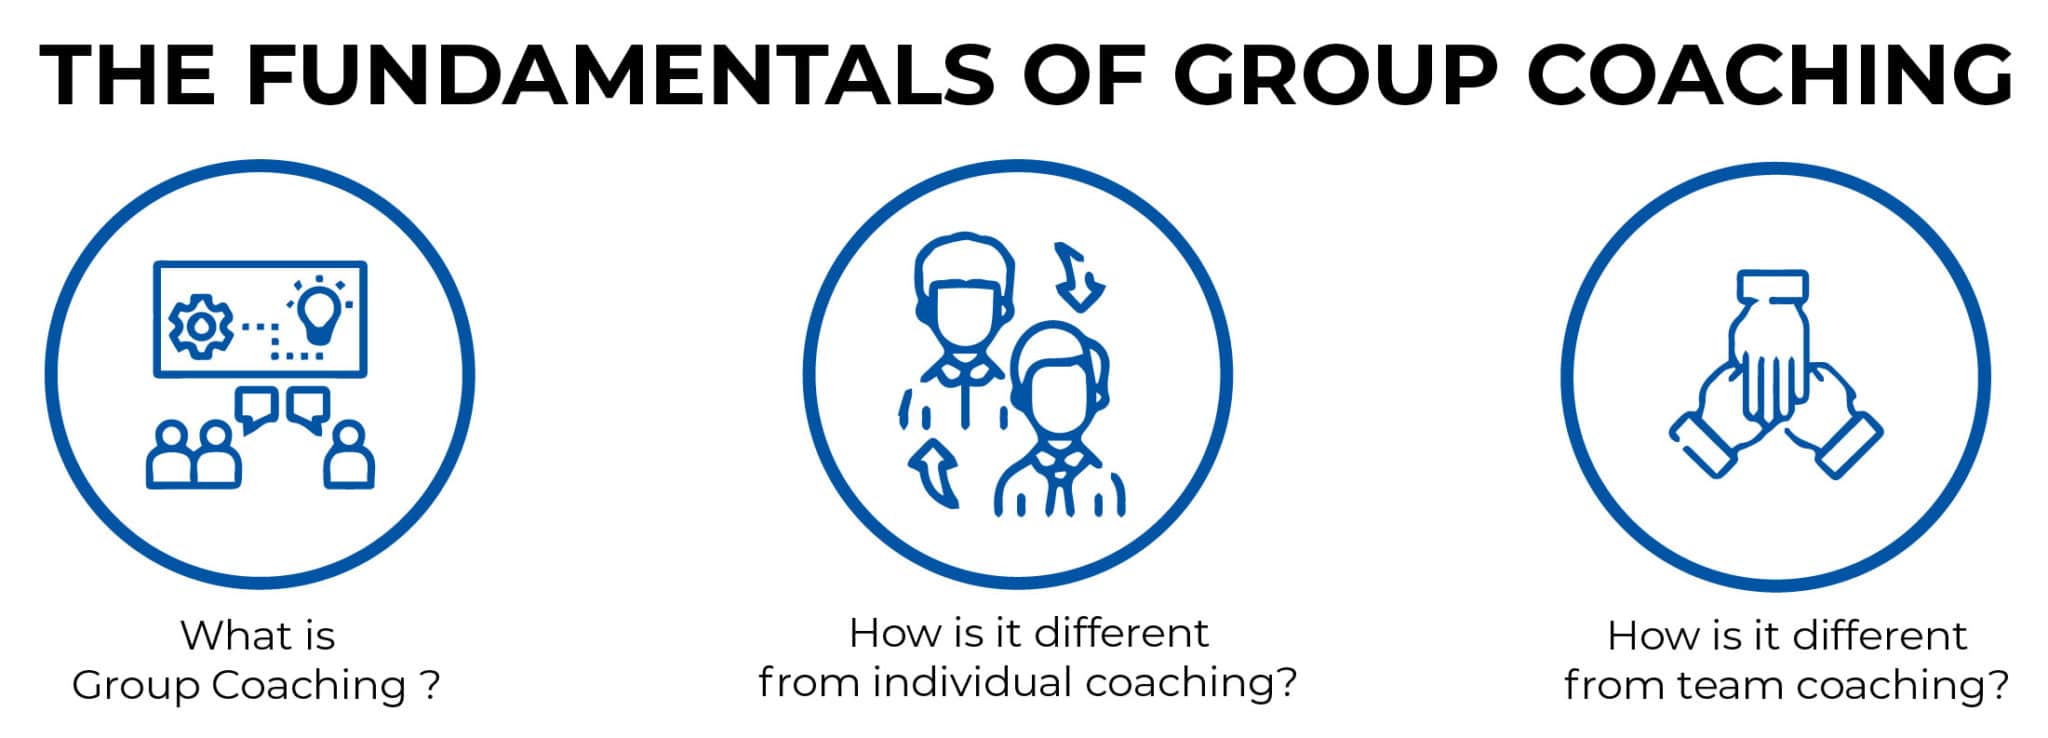 THE FUNDAMENTALS OF GROUP COACHING